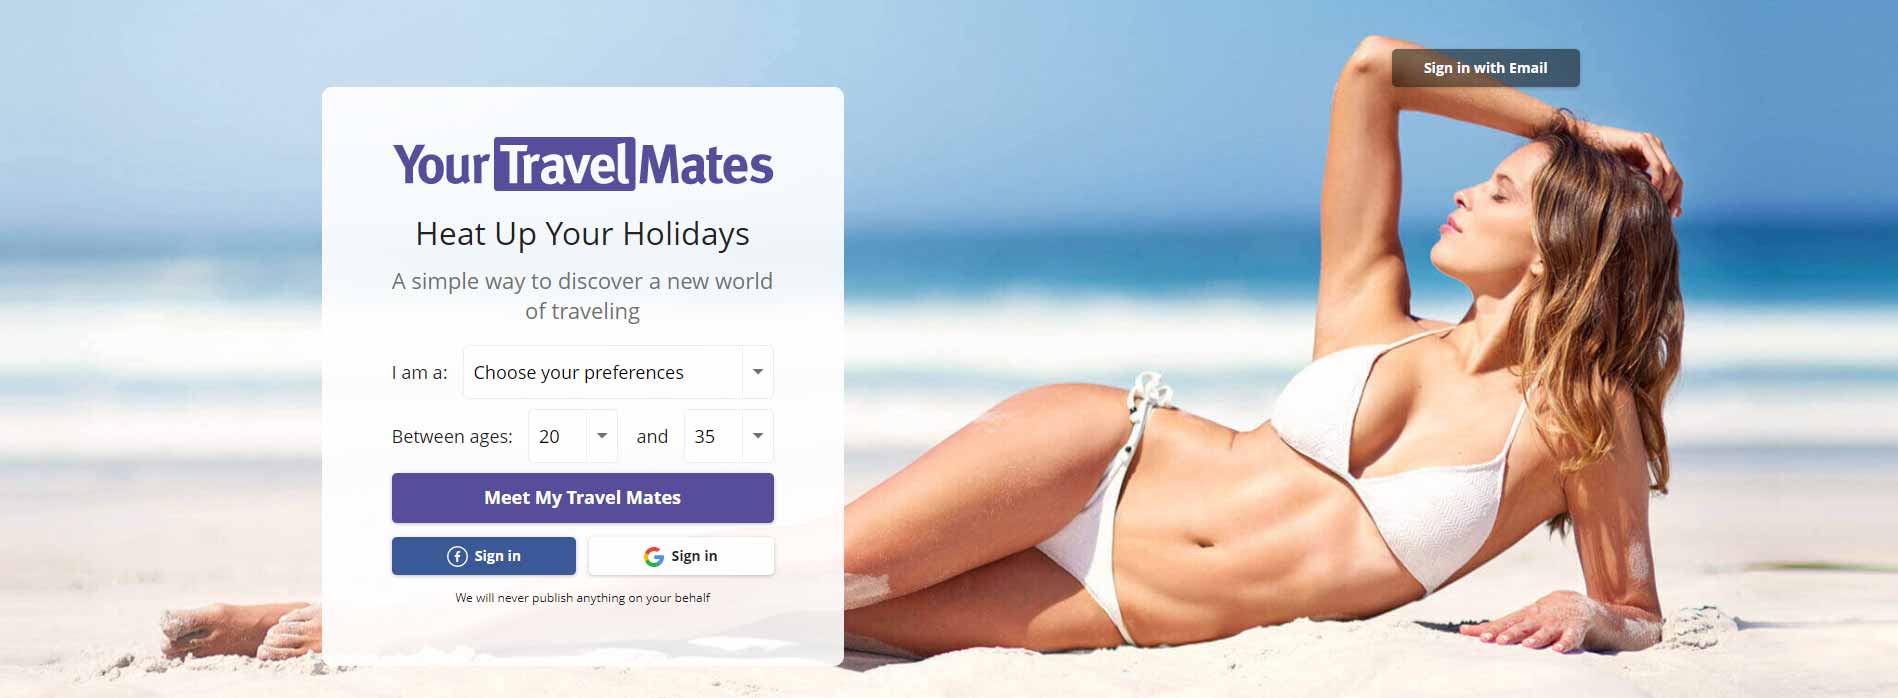 Travel Meet Date home page image for international travel and dating site review